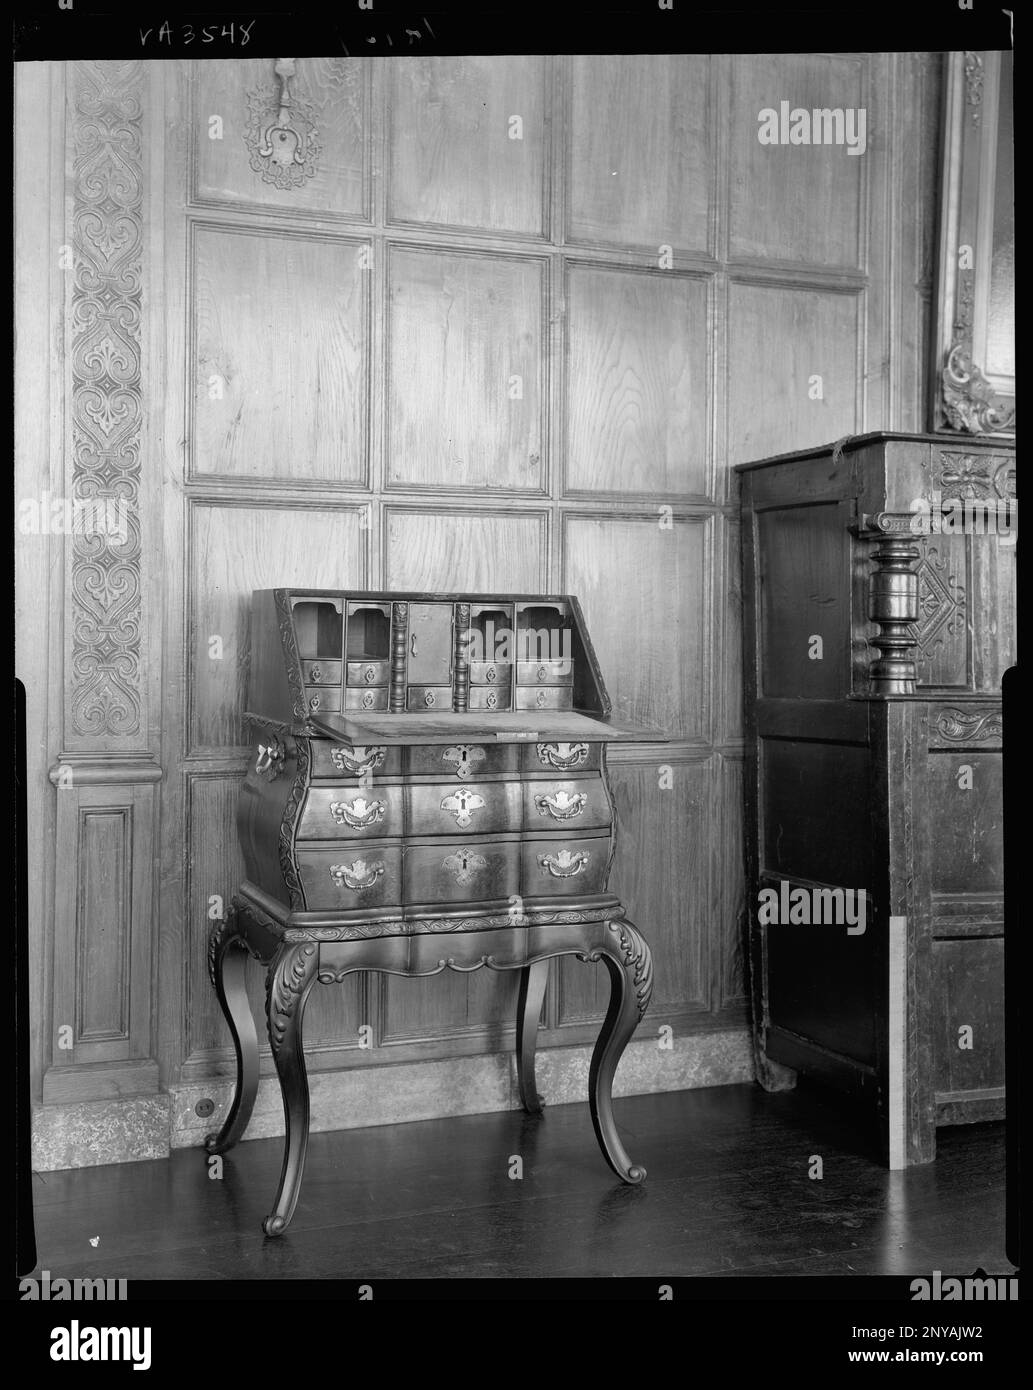 Virginia House, Mexican carved furniture, Richmond, Henrico County, Virginia. Carnegie Survey of the Architecture of the South. United States  Virginia  Henrico County  Richmond, Chests, Paneling, Woodwork. Stock Photo